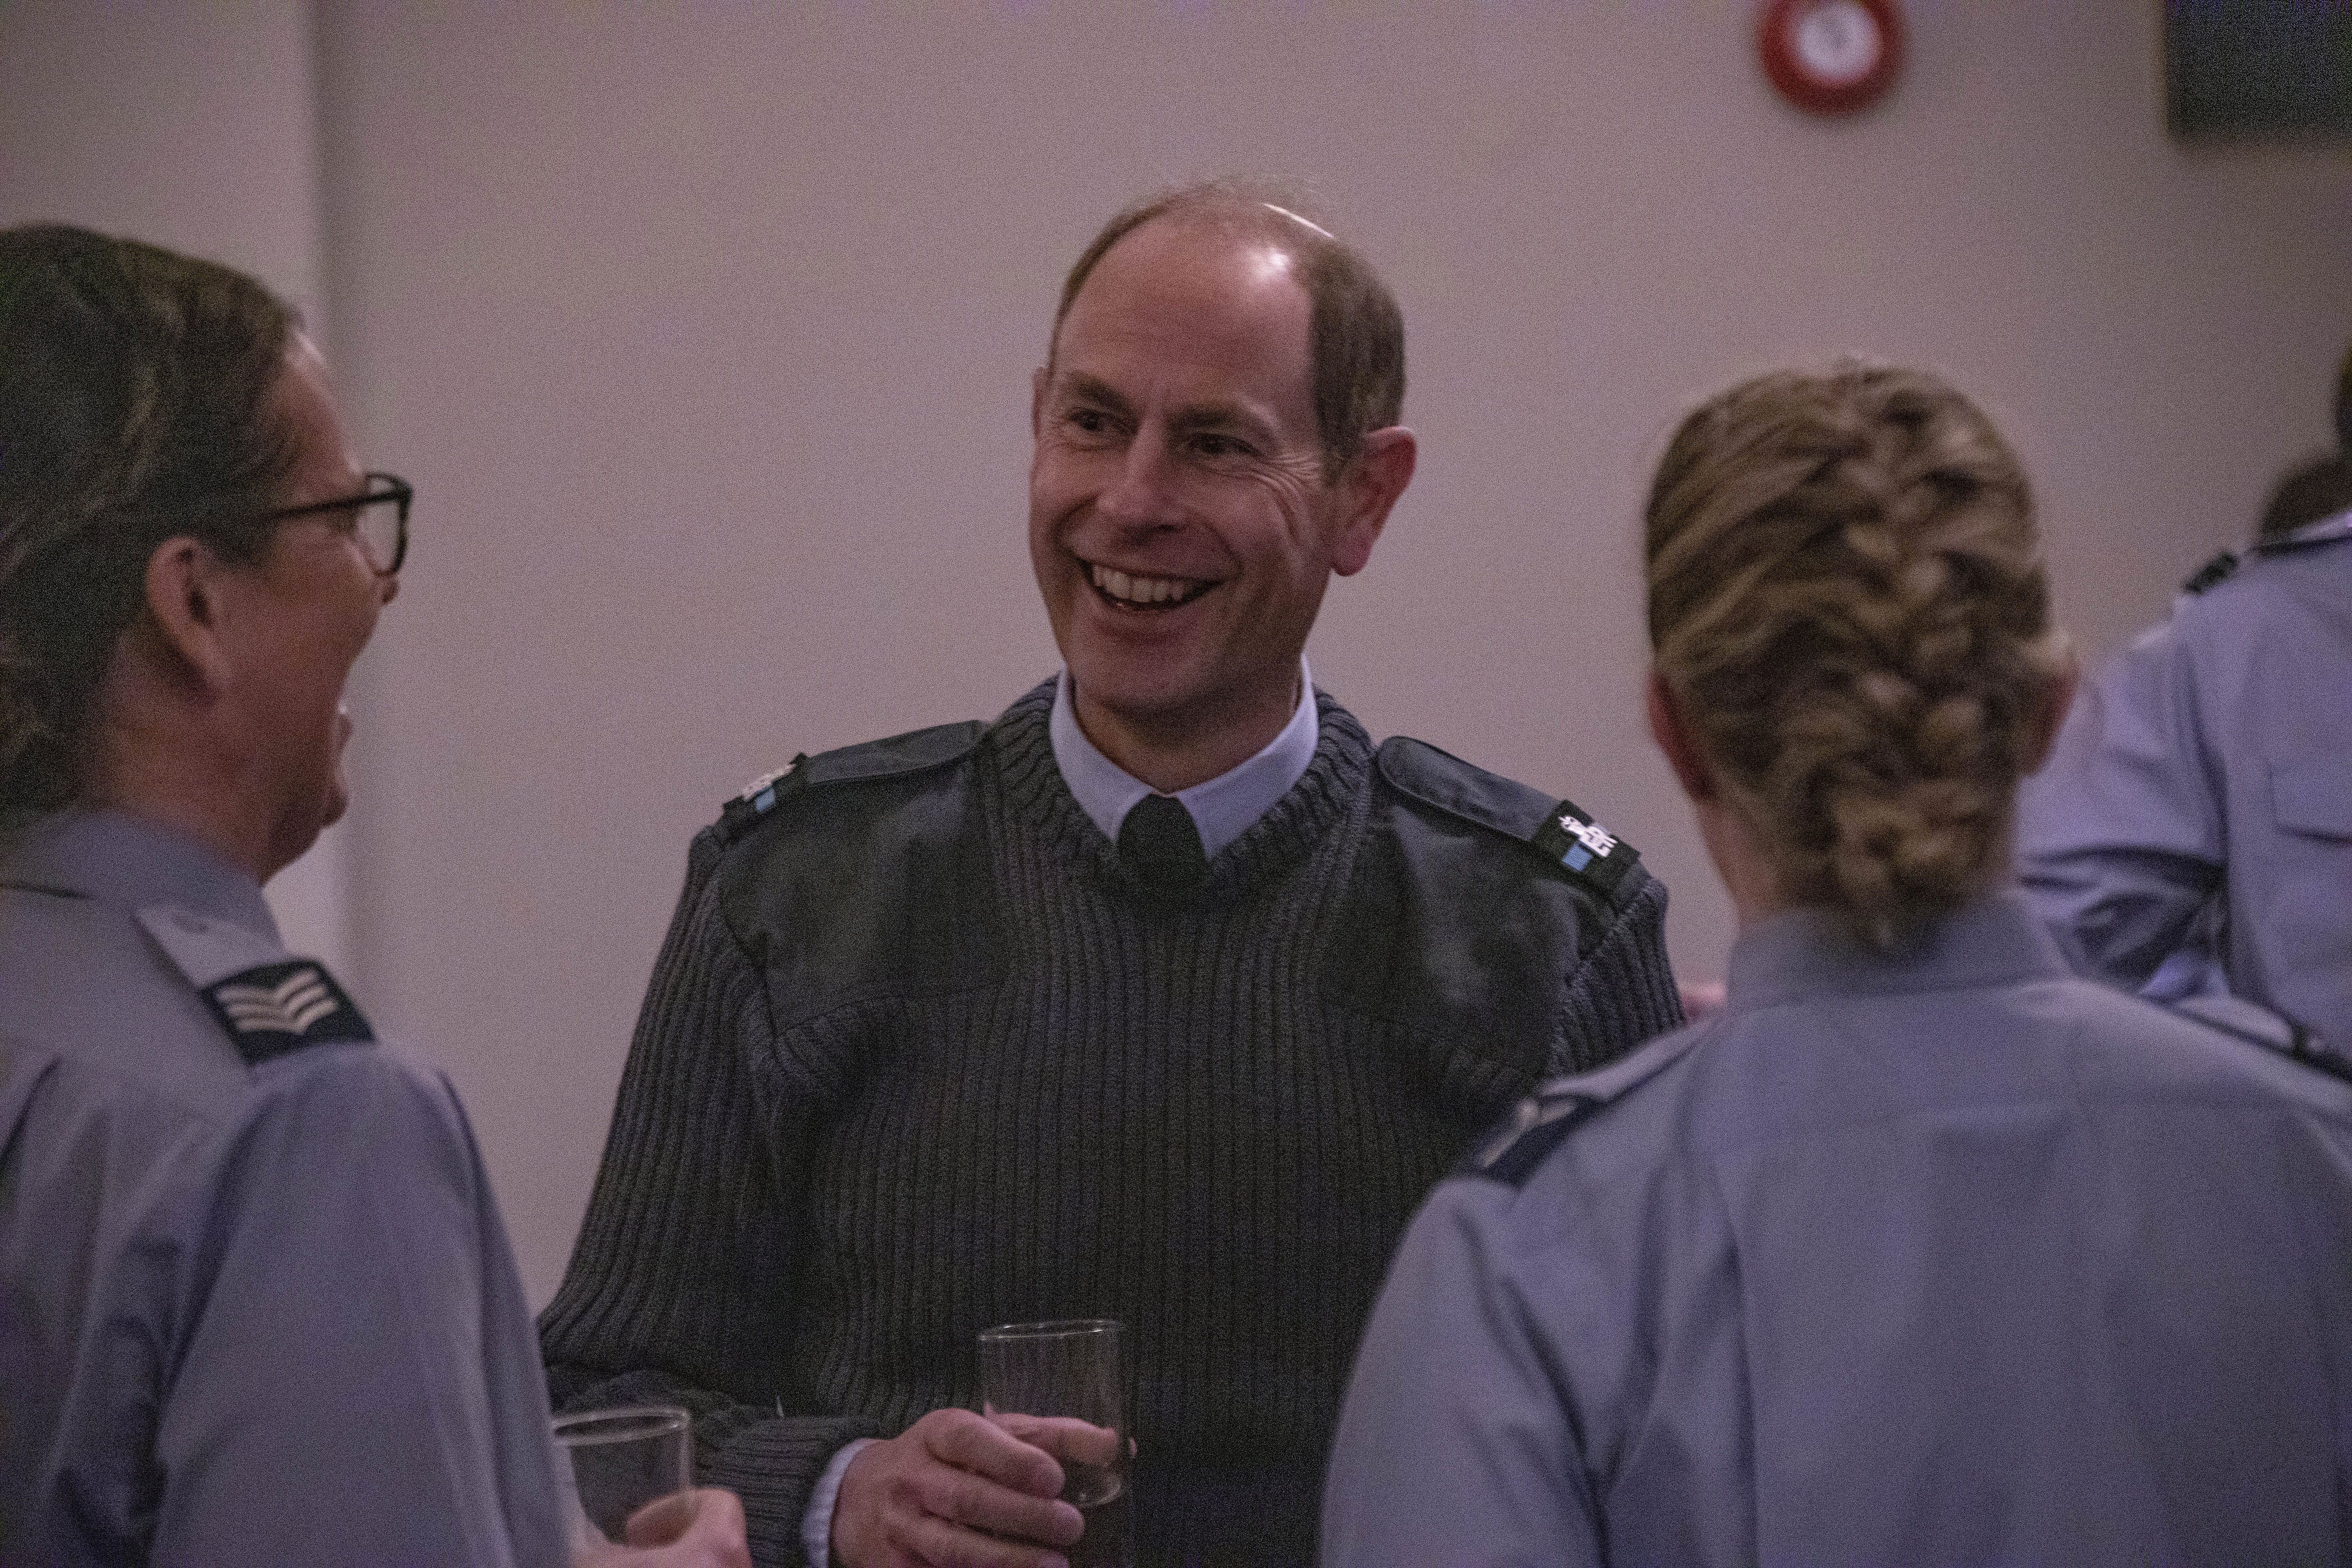 Image shows the Earl of Wessex laughing with RAF aviators.